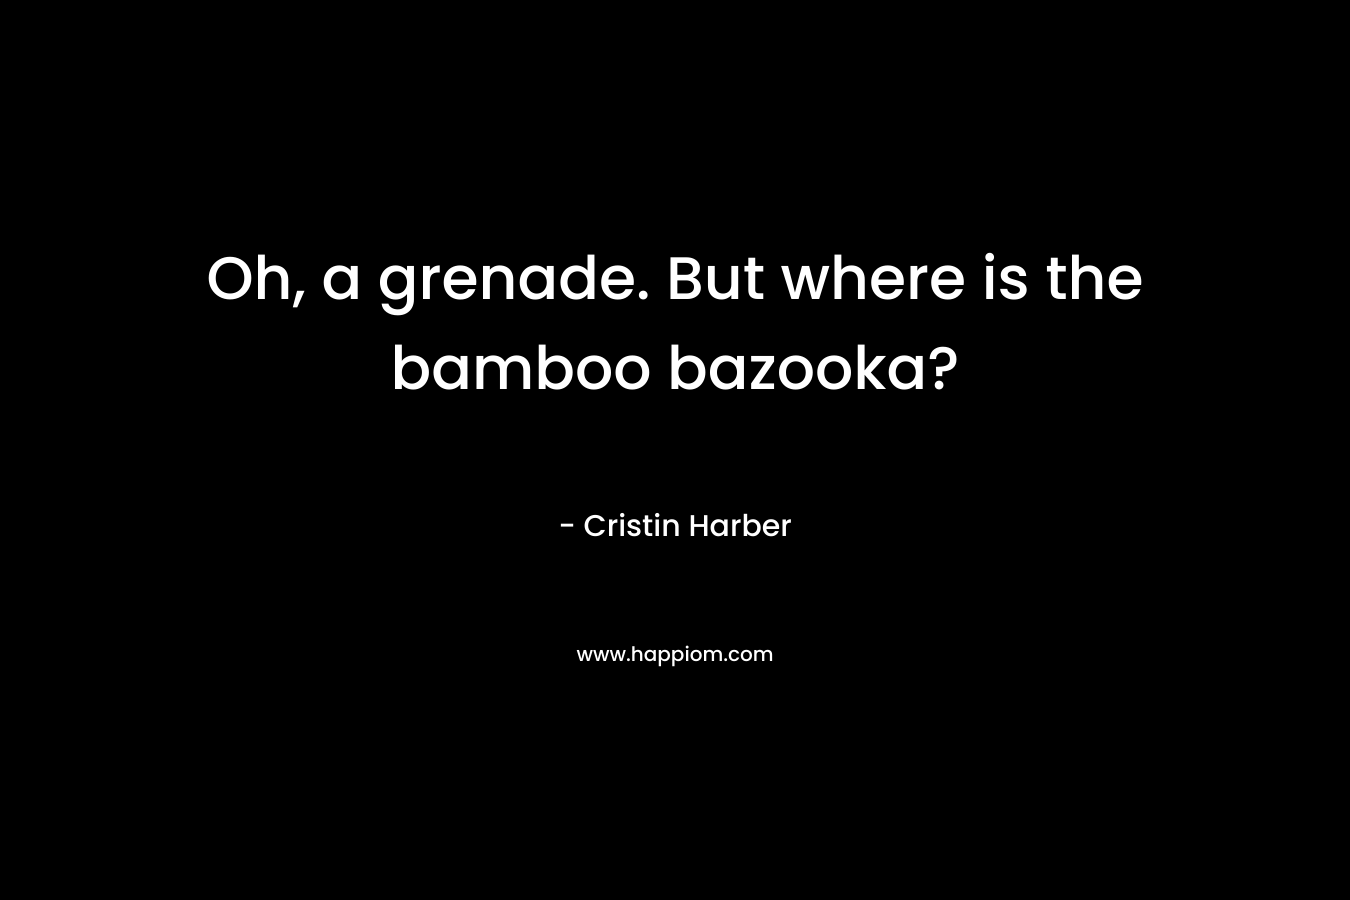 Oh, a grenade. But where is the bamboo bazooka?